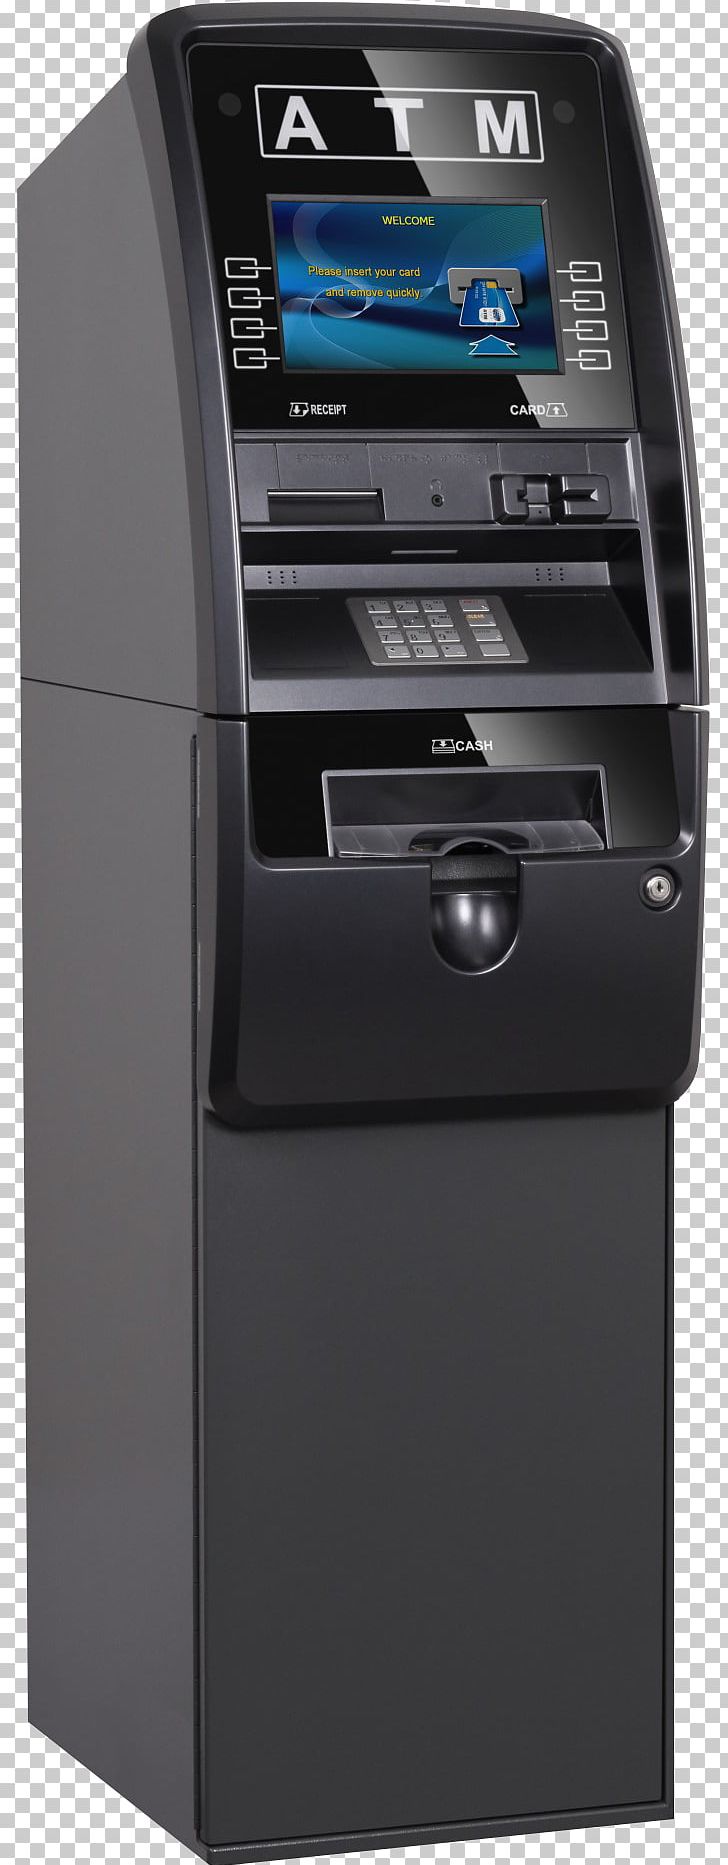 Automated Teller Machine EMV ATM Card Empire Atm Group PNG, Clipart, Atm, Atm Card, Automated Teller Machine, Card Reader, Cash Free PNG Download